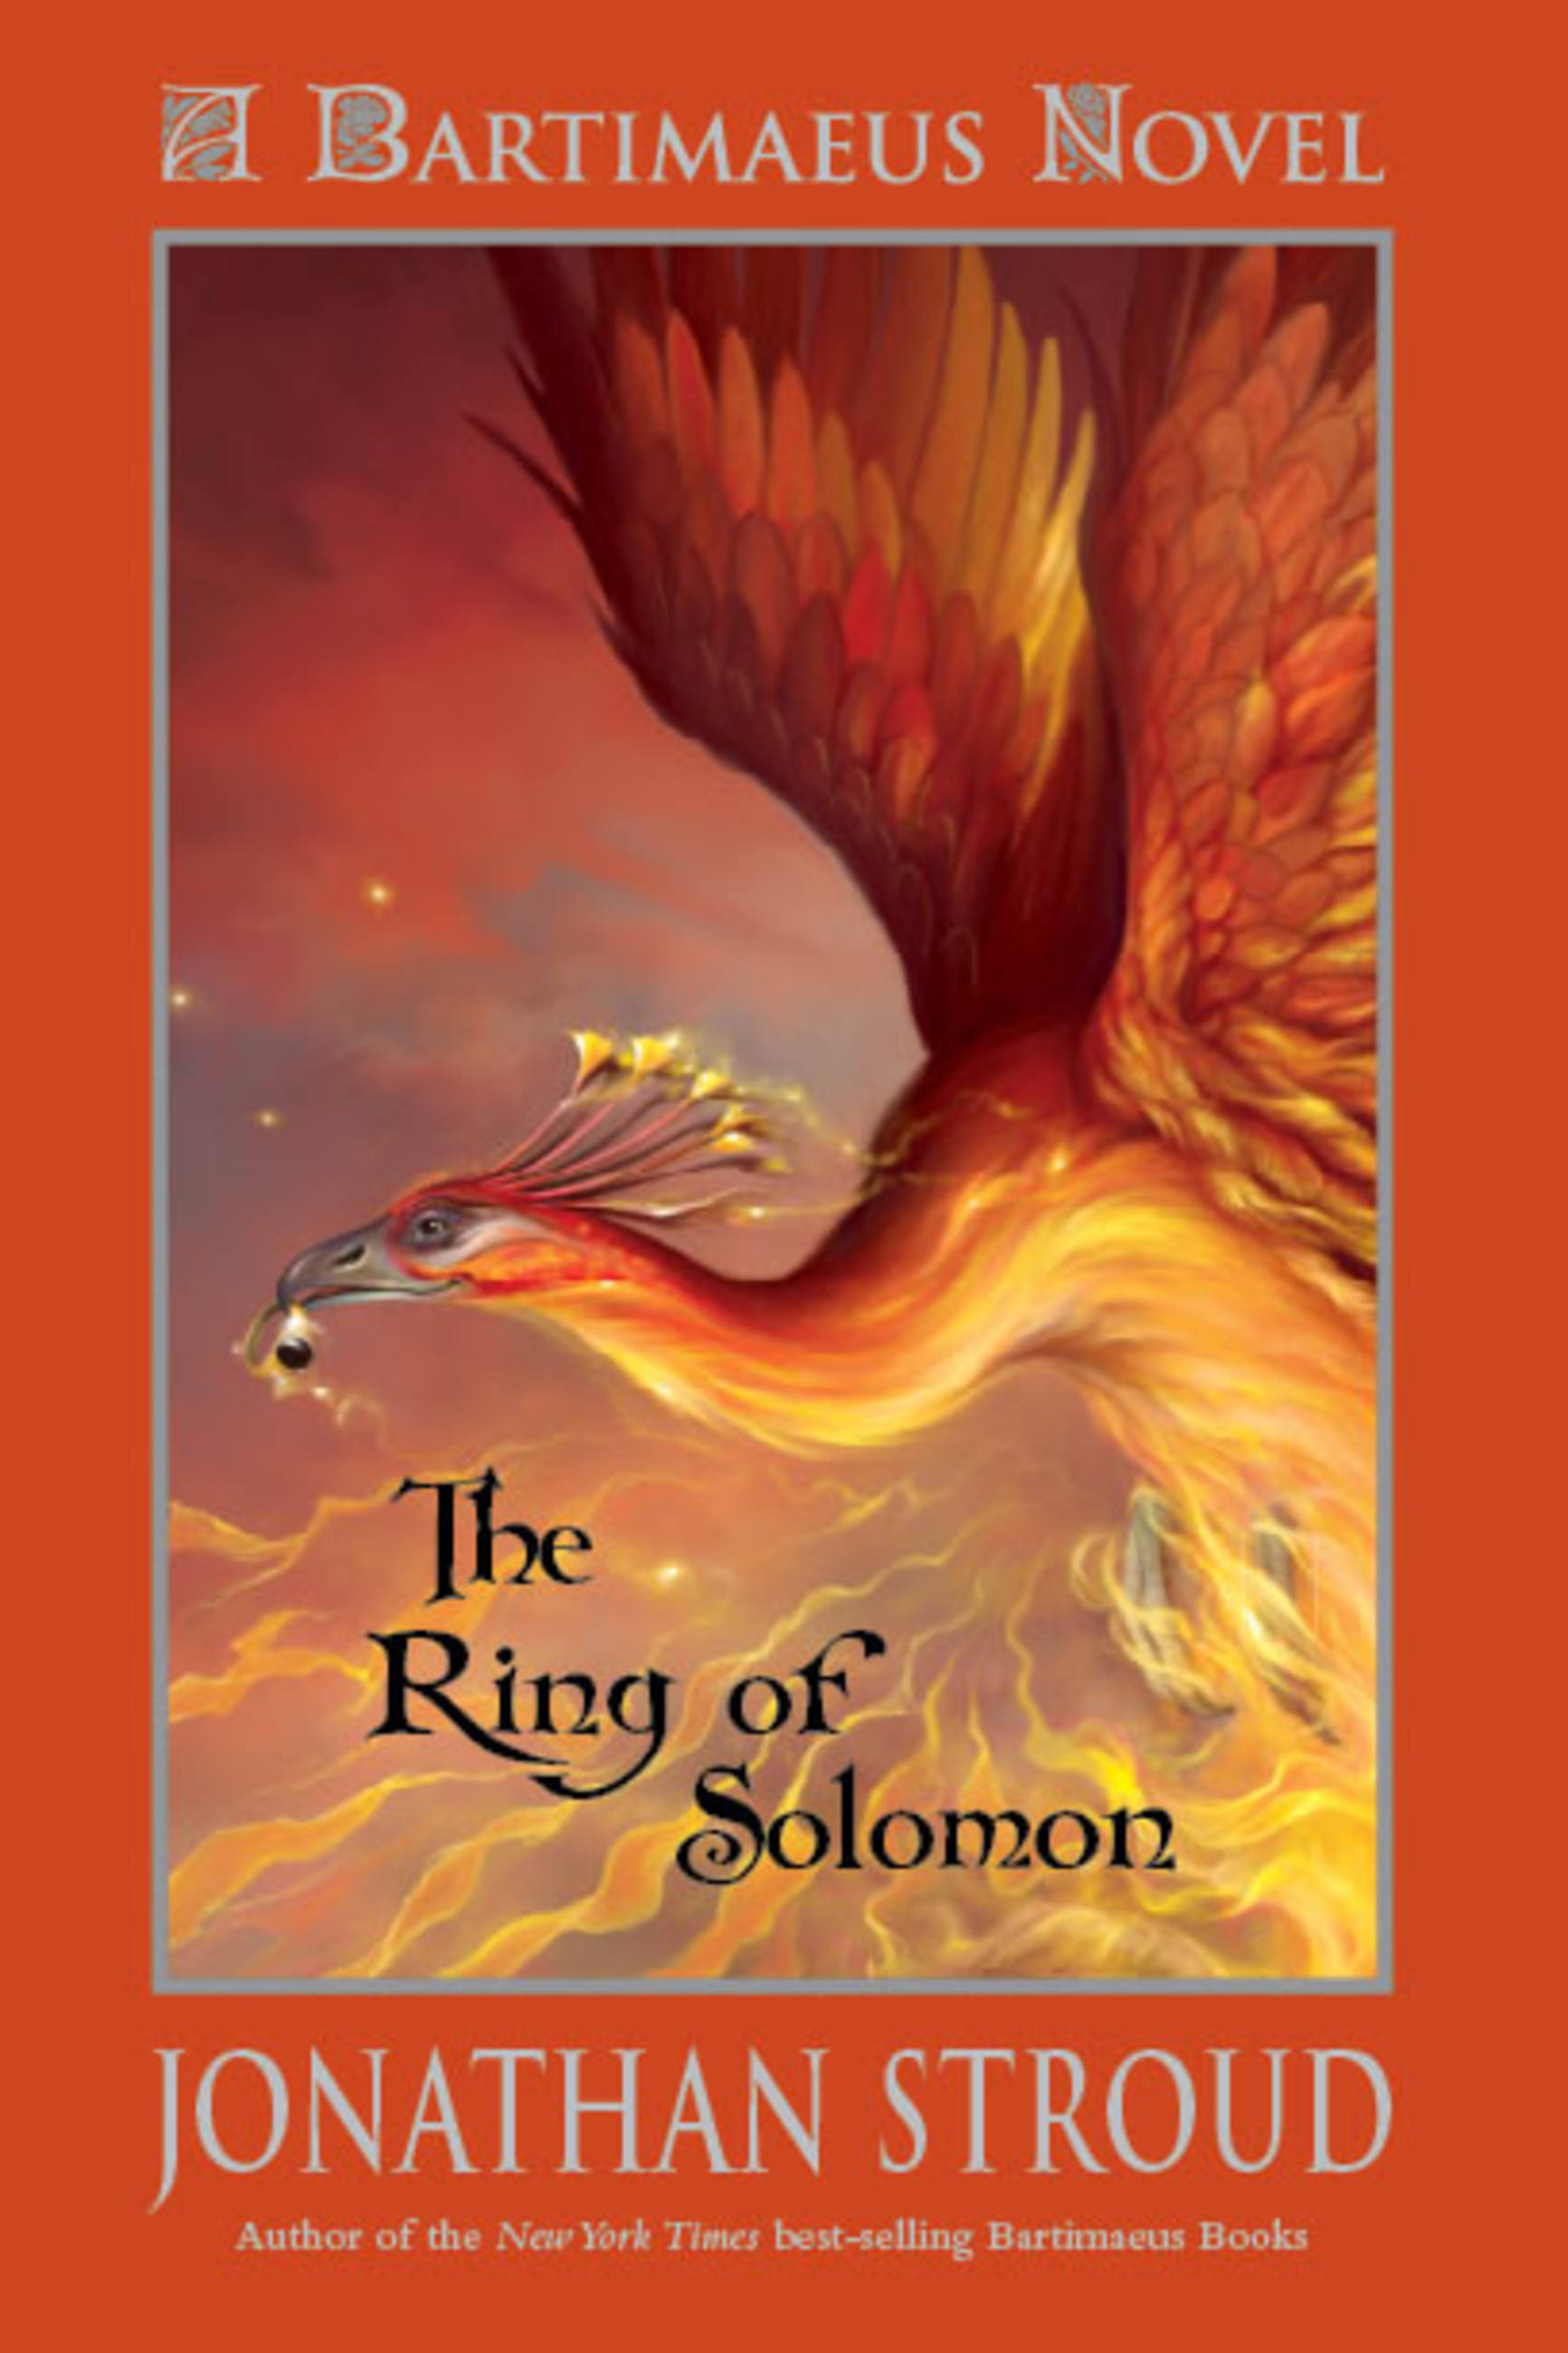 The Ring of Solomon by Jonathan Stroud | Hachette Book Group